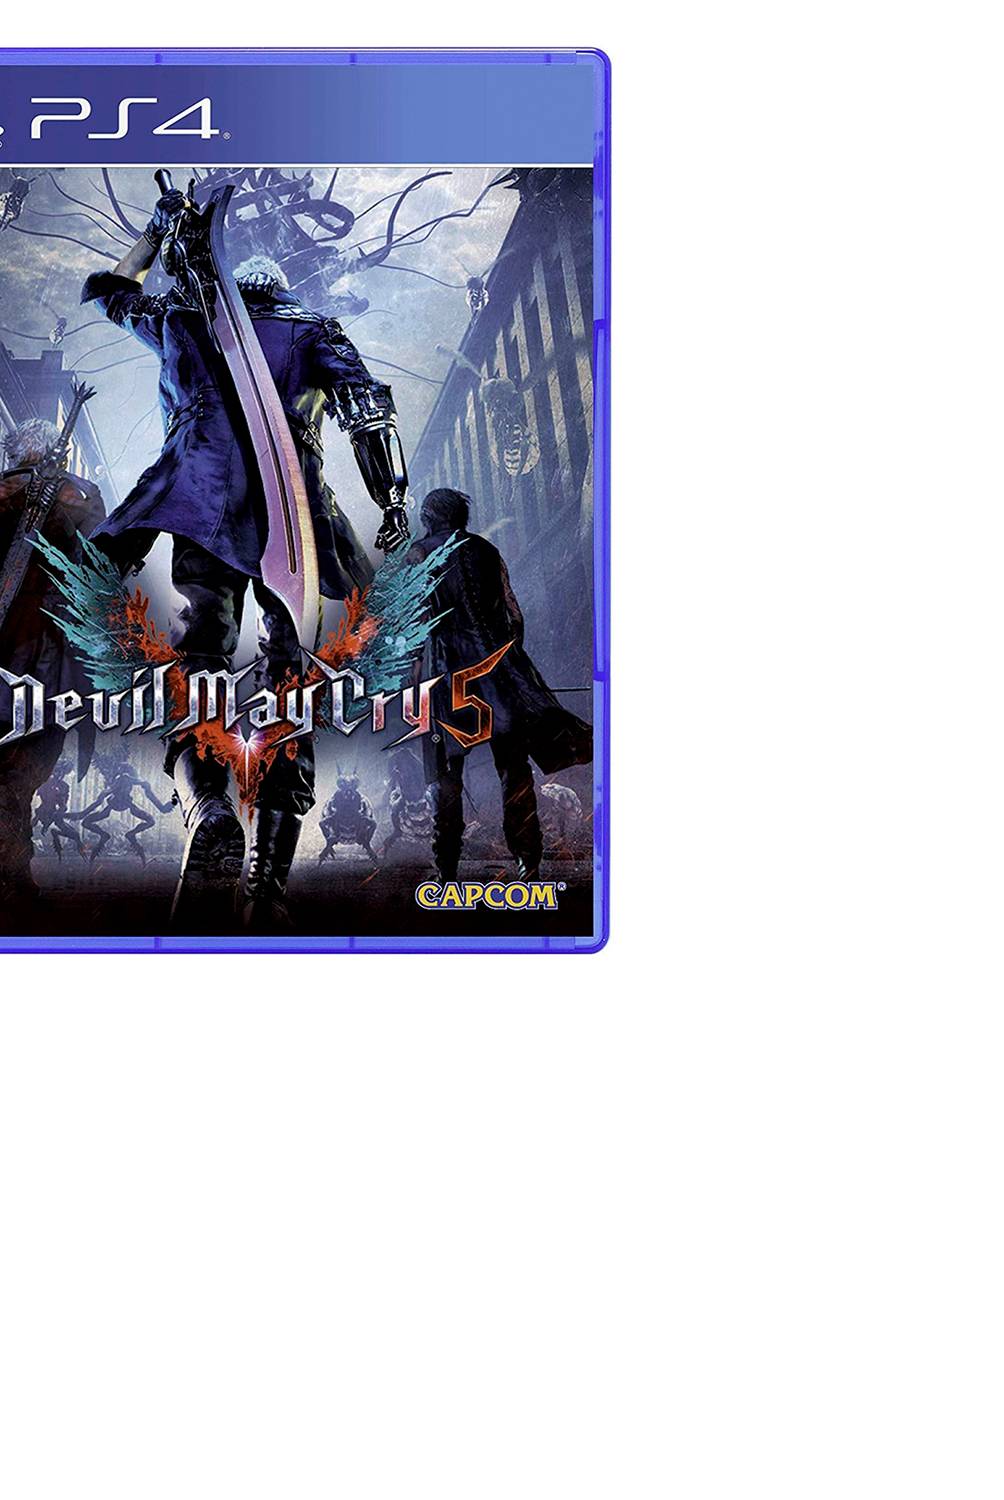 SONY - Devil May Cry 5 (PS4)